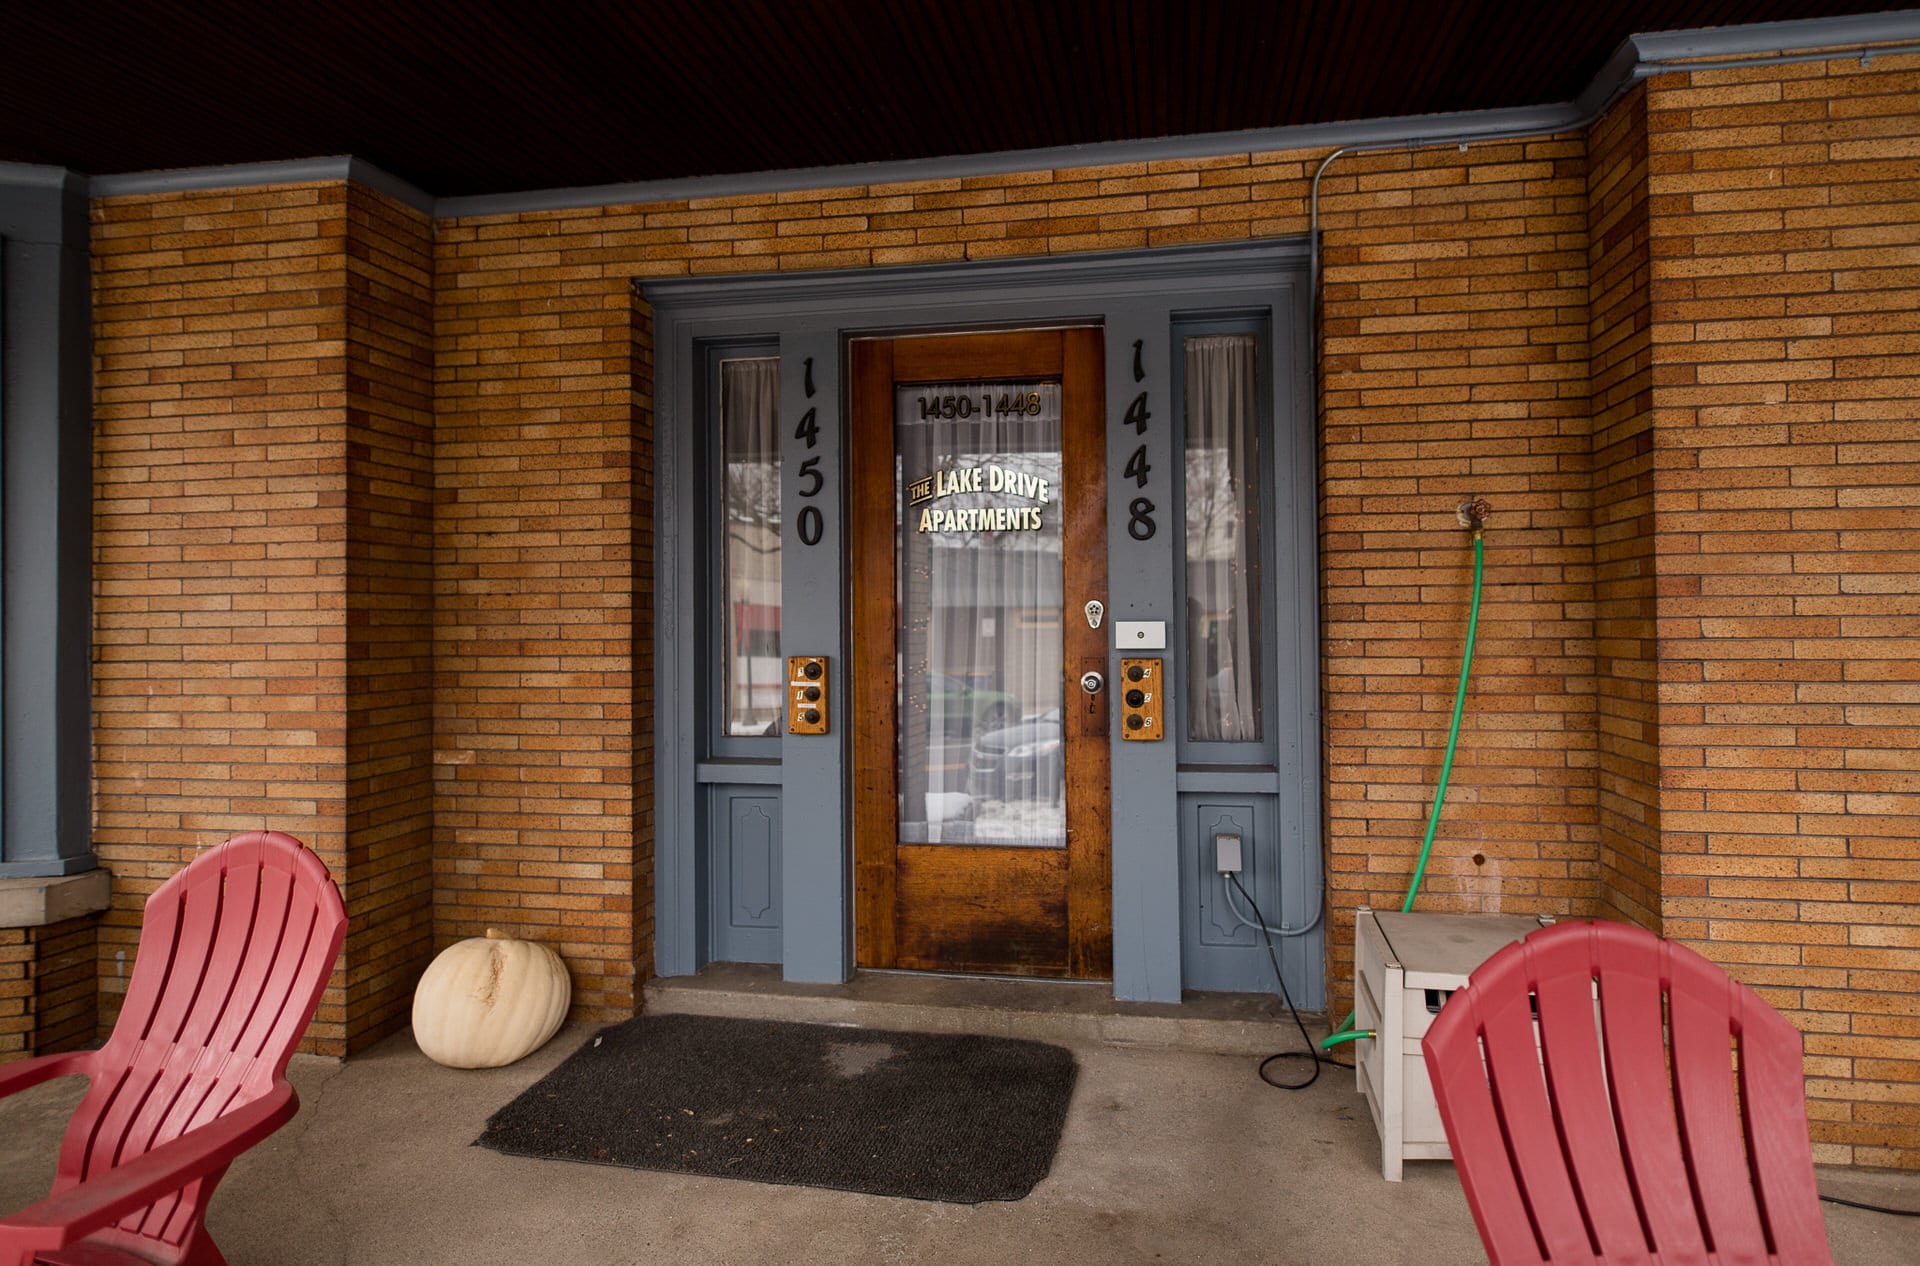 The front porch of the apartment building in Allendale, where Rosemarie was killed, in 2020. Images from that night show her ex-boyfriend Jeremy’s pistol.